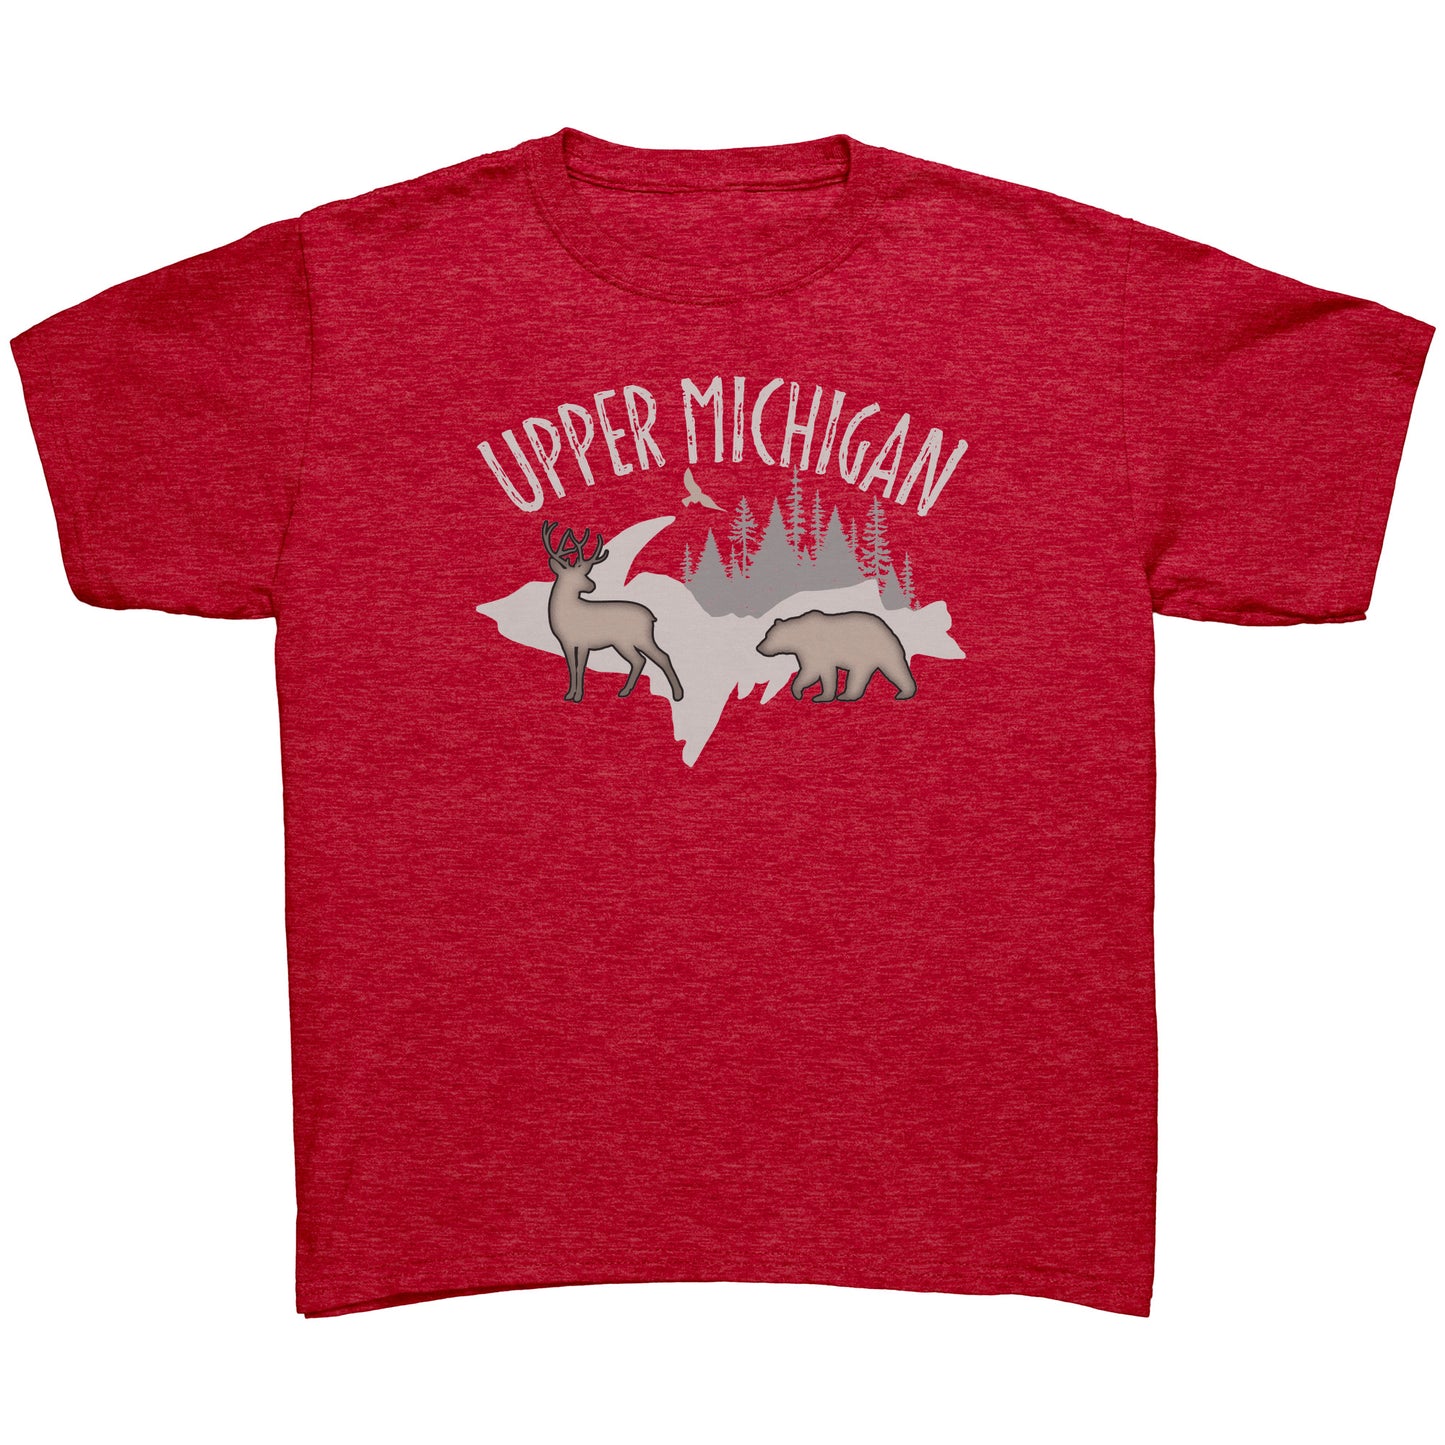 Upper Michigan Shirt with Deer, Bear, and Forest